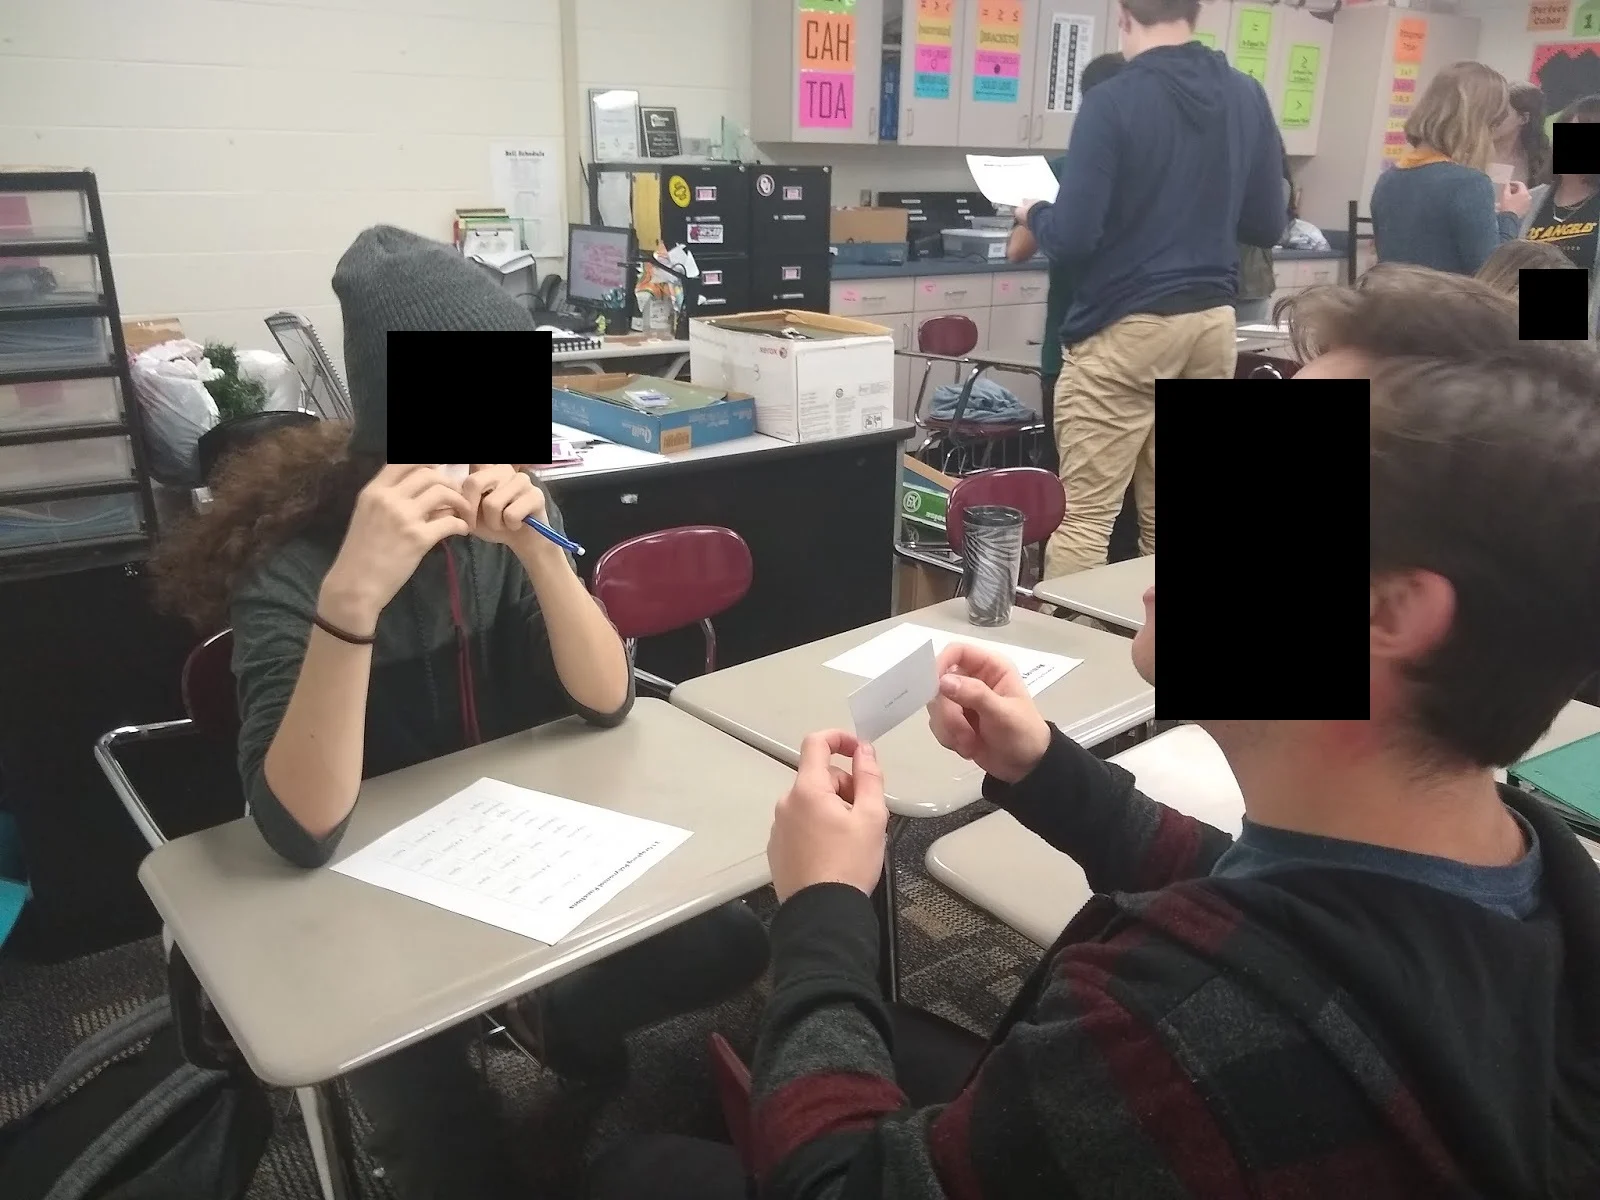 Naming Polynomials Speed Dating Activity